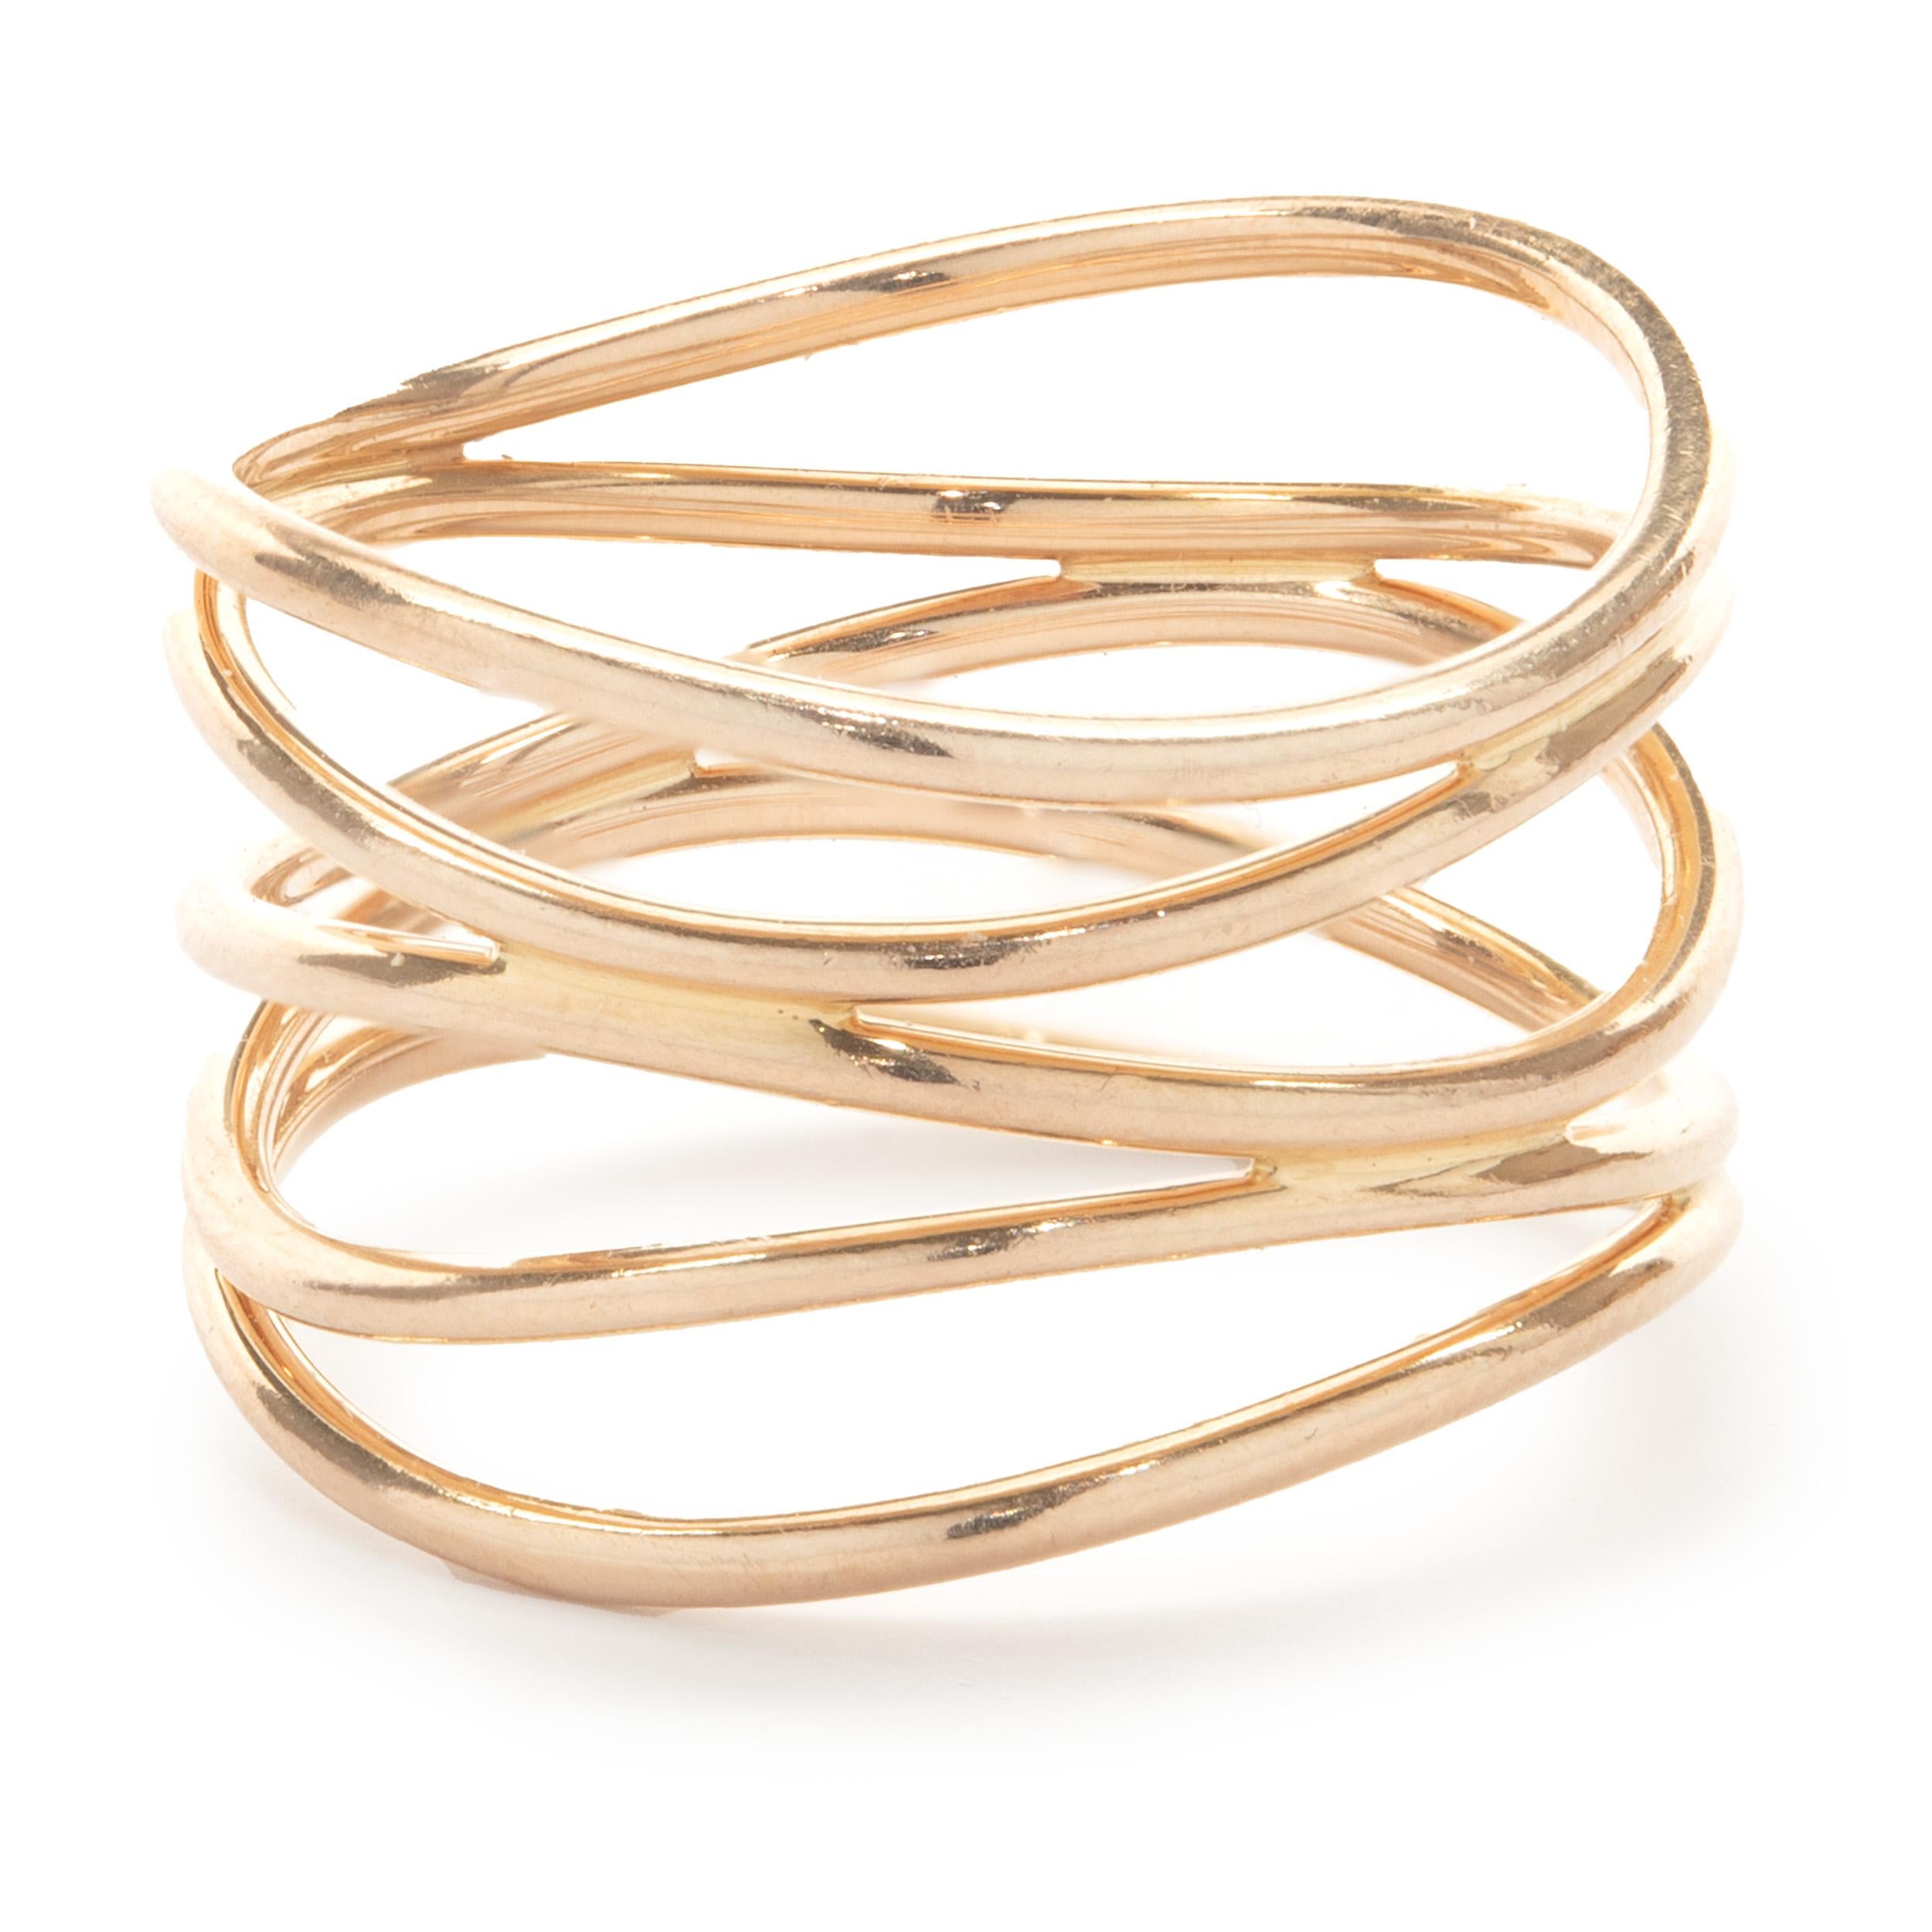 Designer: Tiffany & Co. 
Material: 18K rose gold
Dimensions: ring top measures 14mm wide
Size: 8
Weight: 5.35 grams
